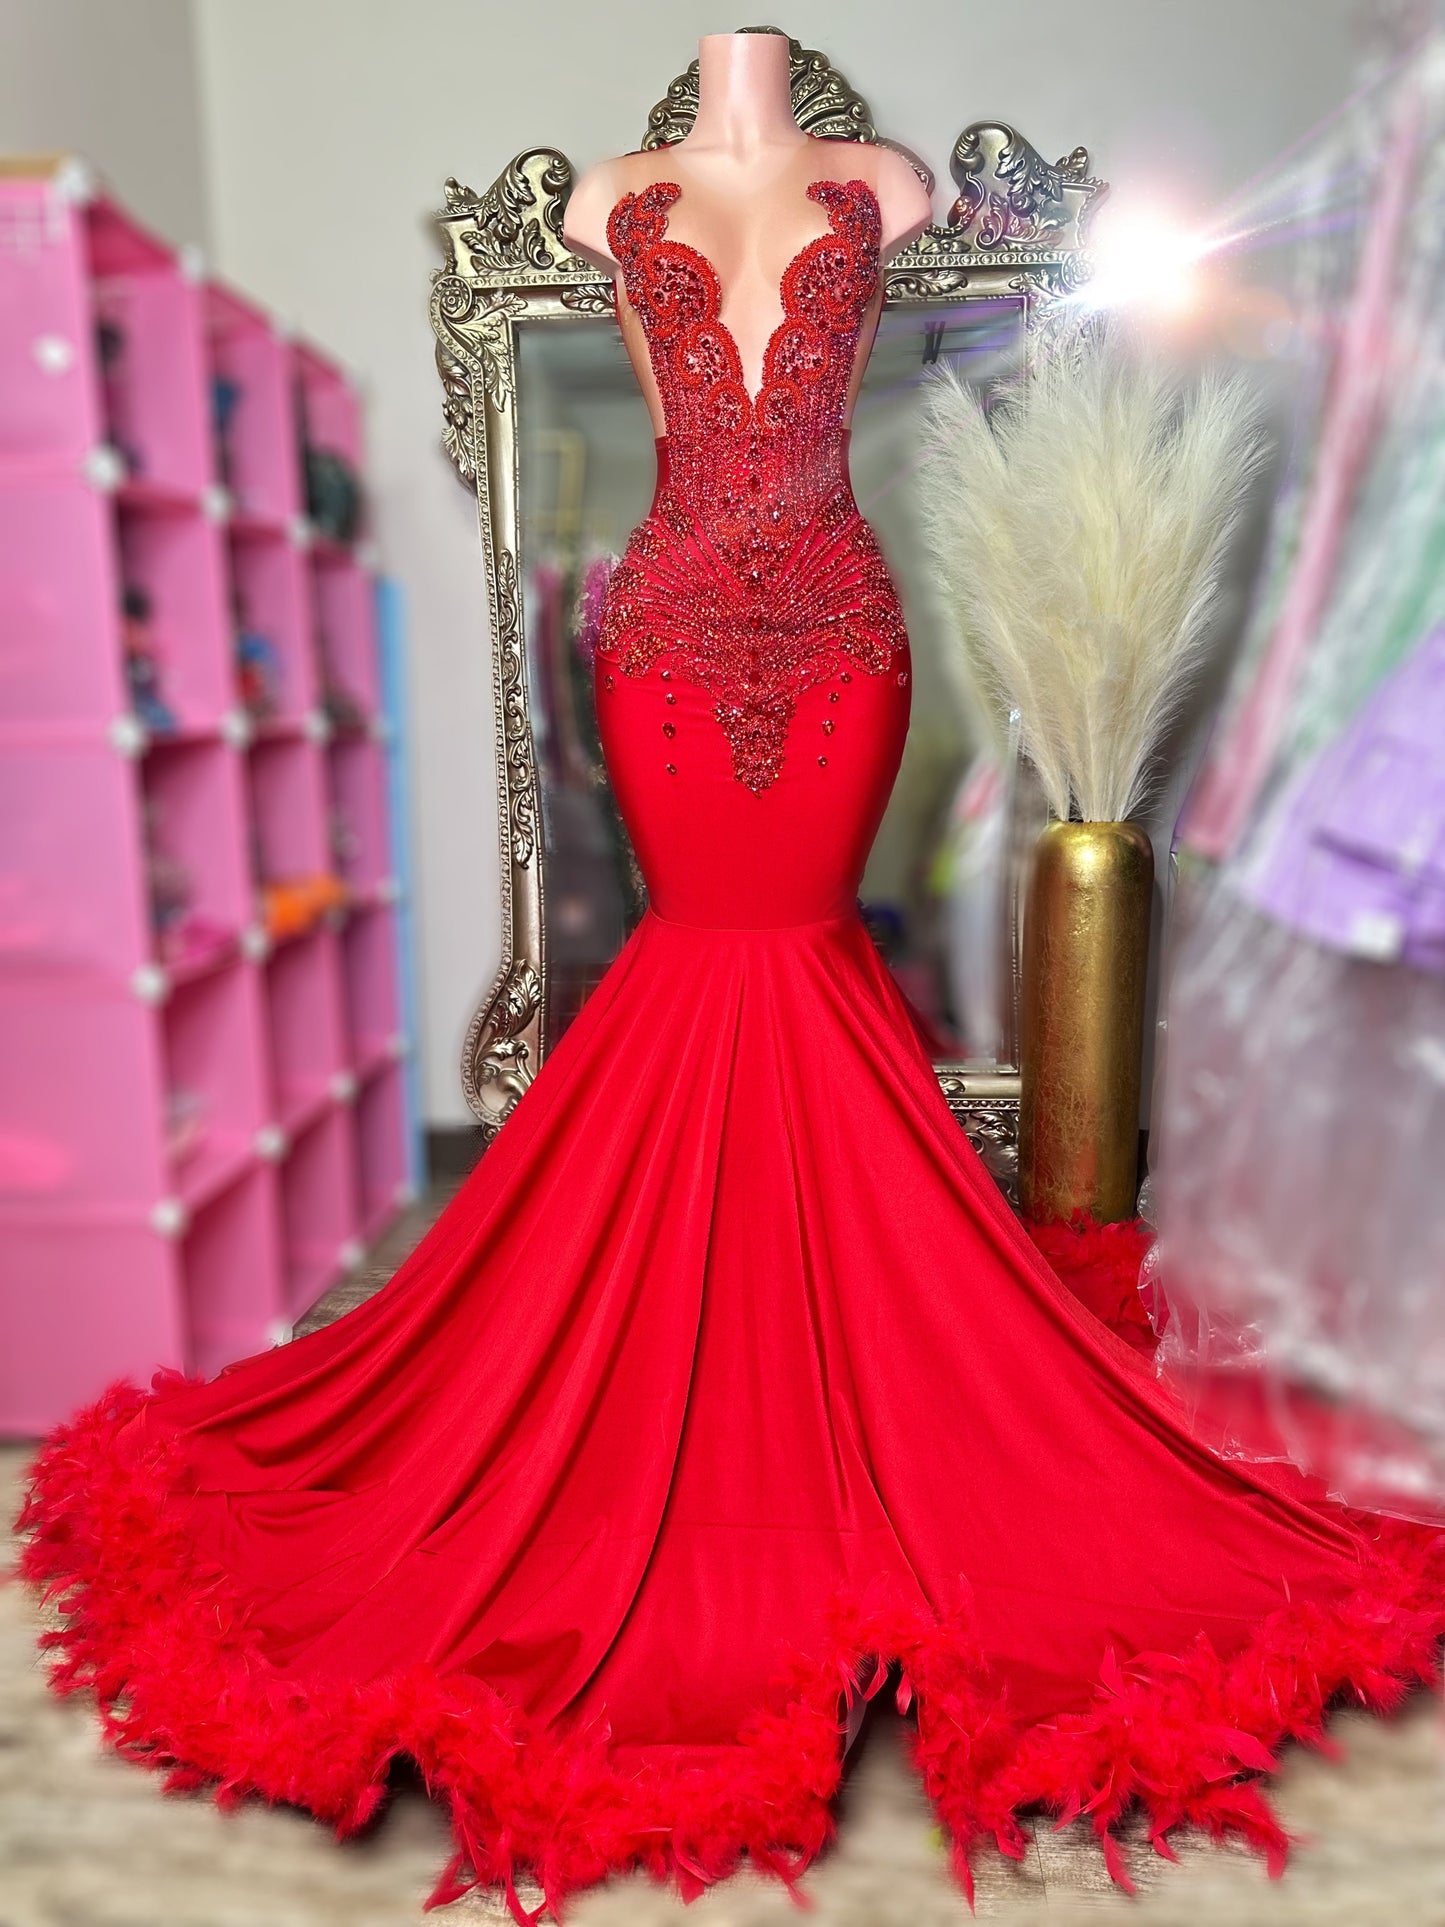 PRE ORDER ARIANNA GOWN w/ & w/o FEATHERS- any color